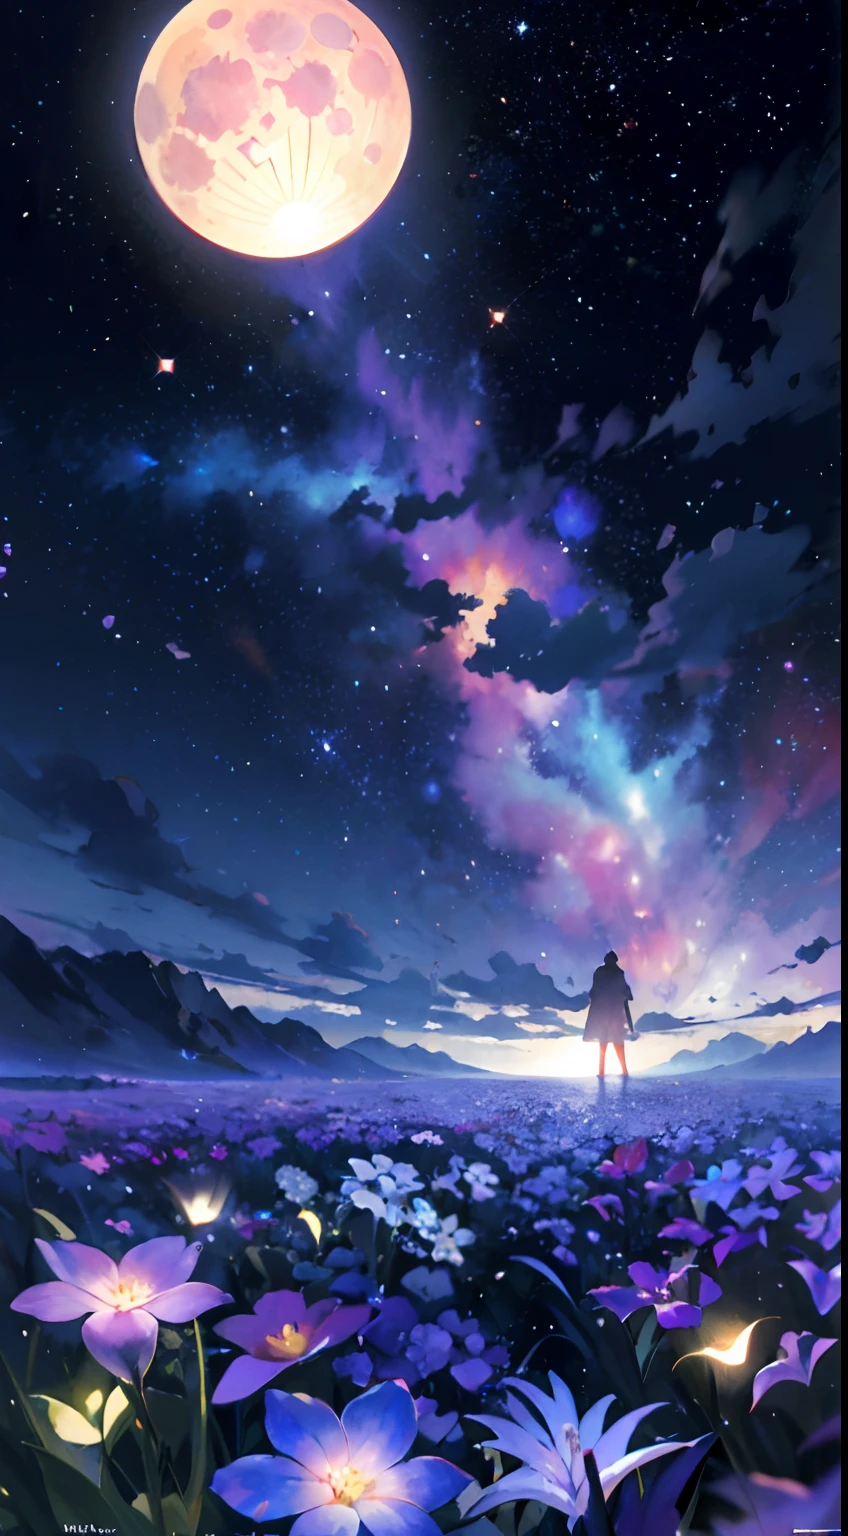 A person standing in a field of flowers under a full moon - SeaArt AI